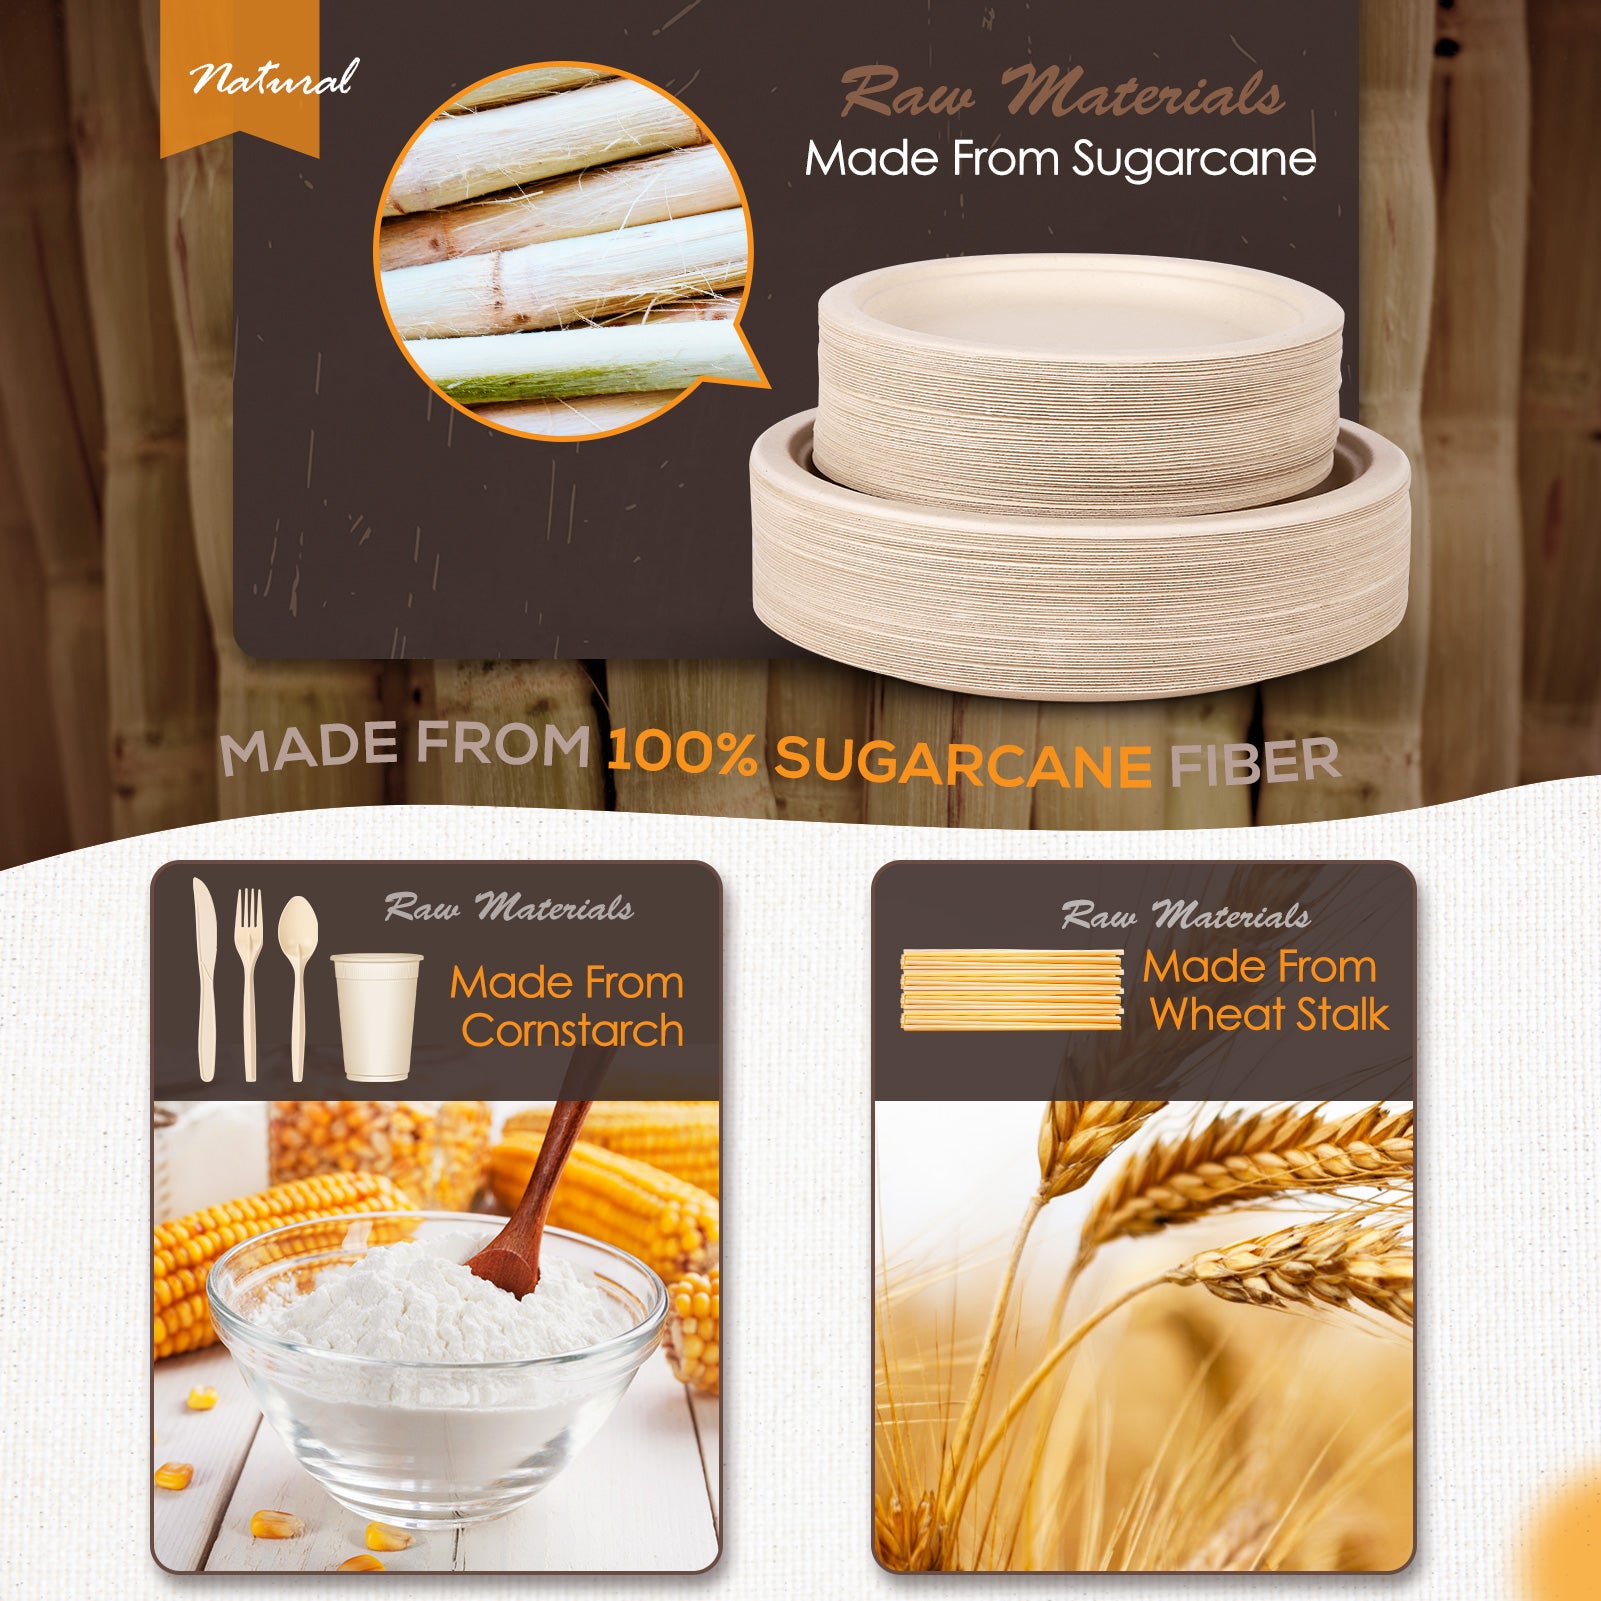 Premium Quality Biodegradable Disposable Plates, Straws, Cups & more!